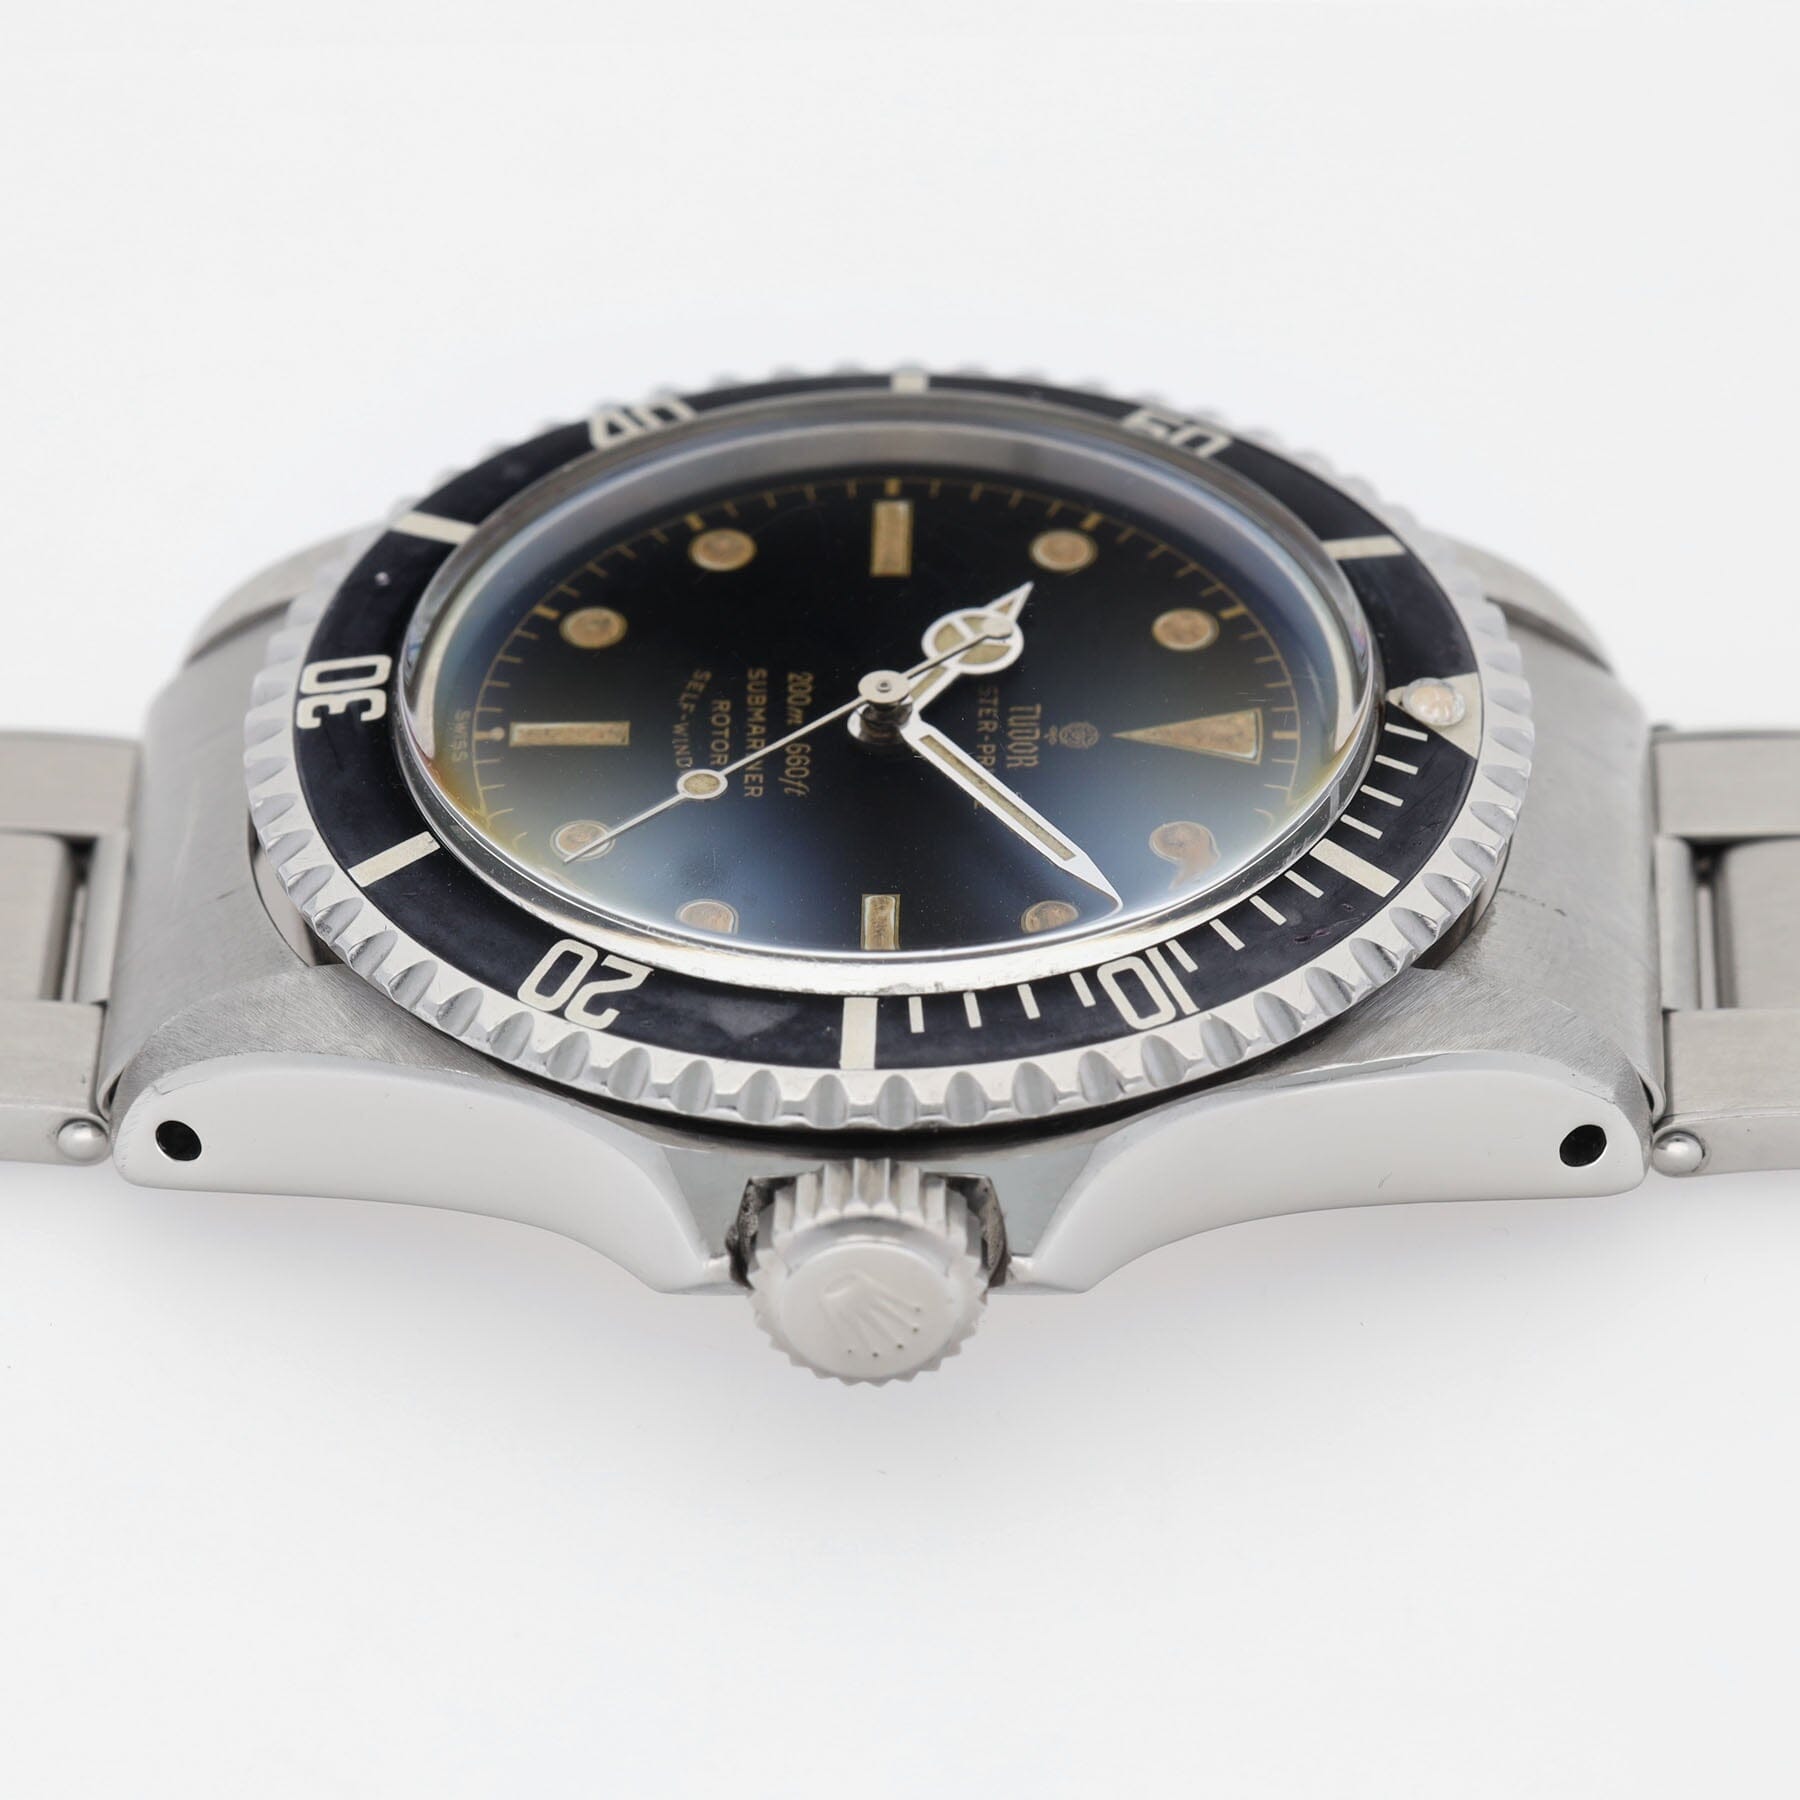 Tudor Submariner ref 7928 exclamation mark Chaptering dial PCG case